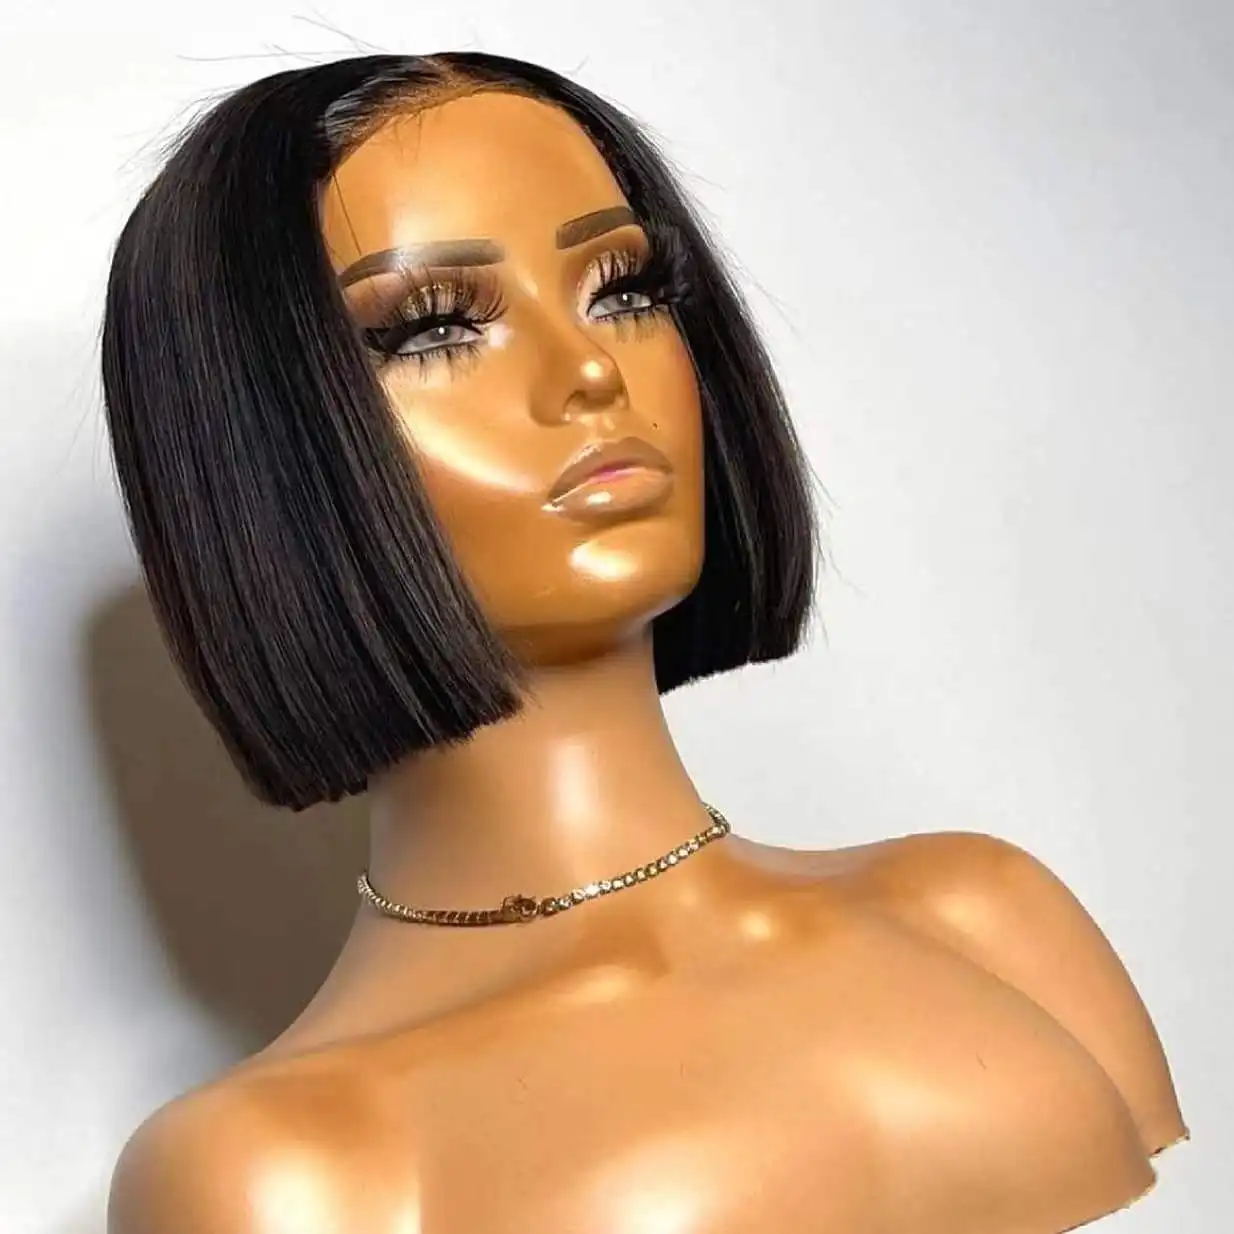 Short Pixie Cut Wig Short Bob 150%13*4 Lace Frontal Wig For Black Women Pre Plucked With Baby Hair With 4*4 Lace